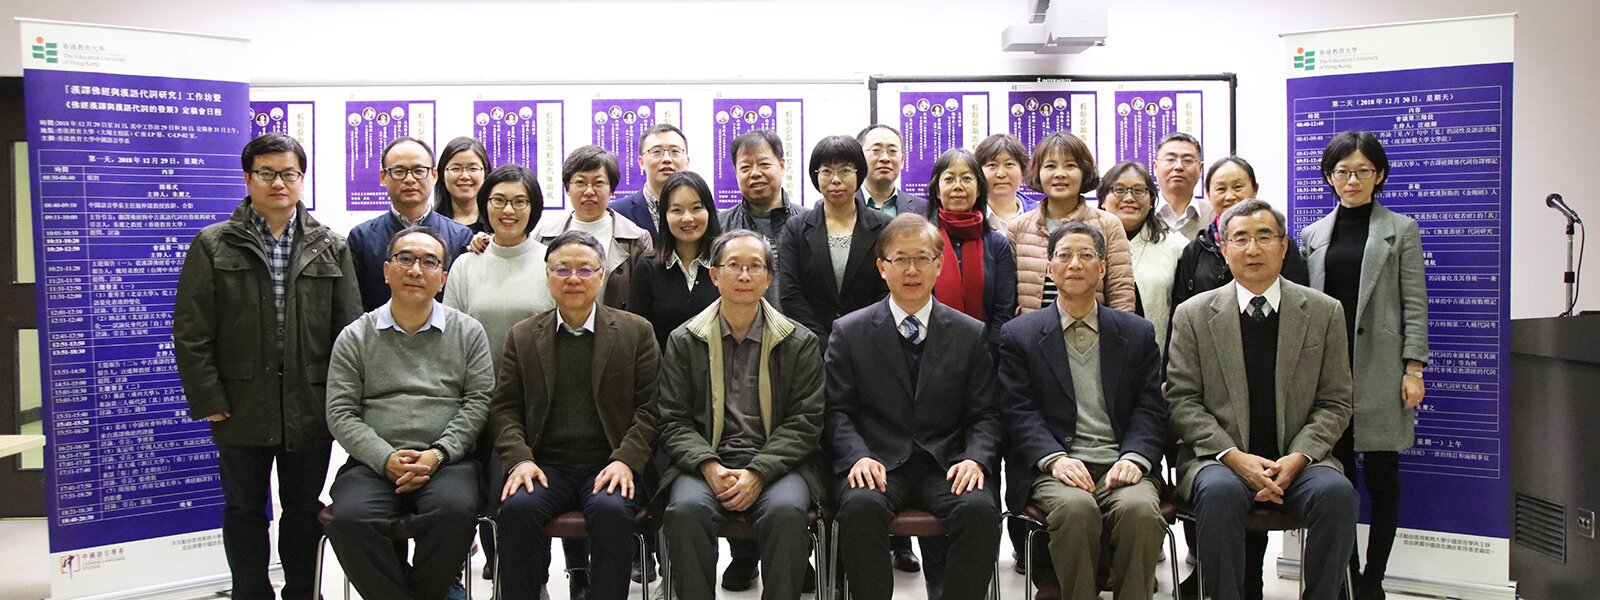 Advanced Workshop on Studies of Chinese Translations of Buddhist Sutras and Chinese Pronouns